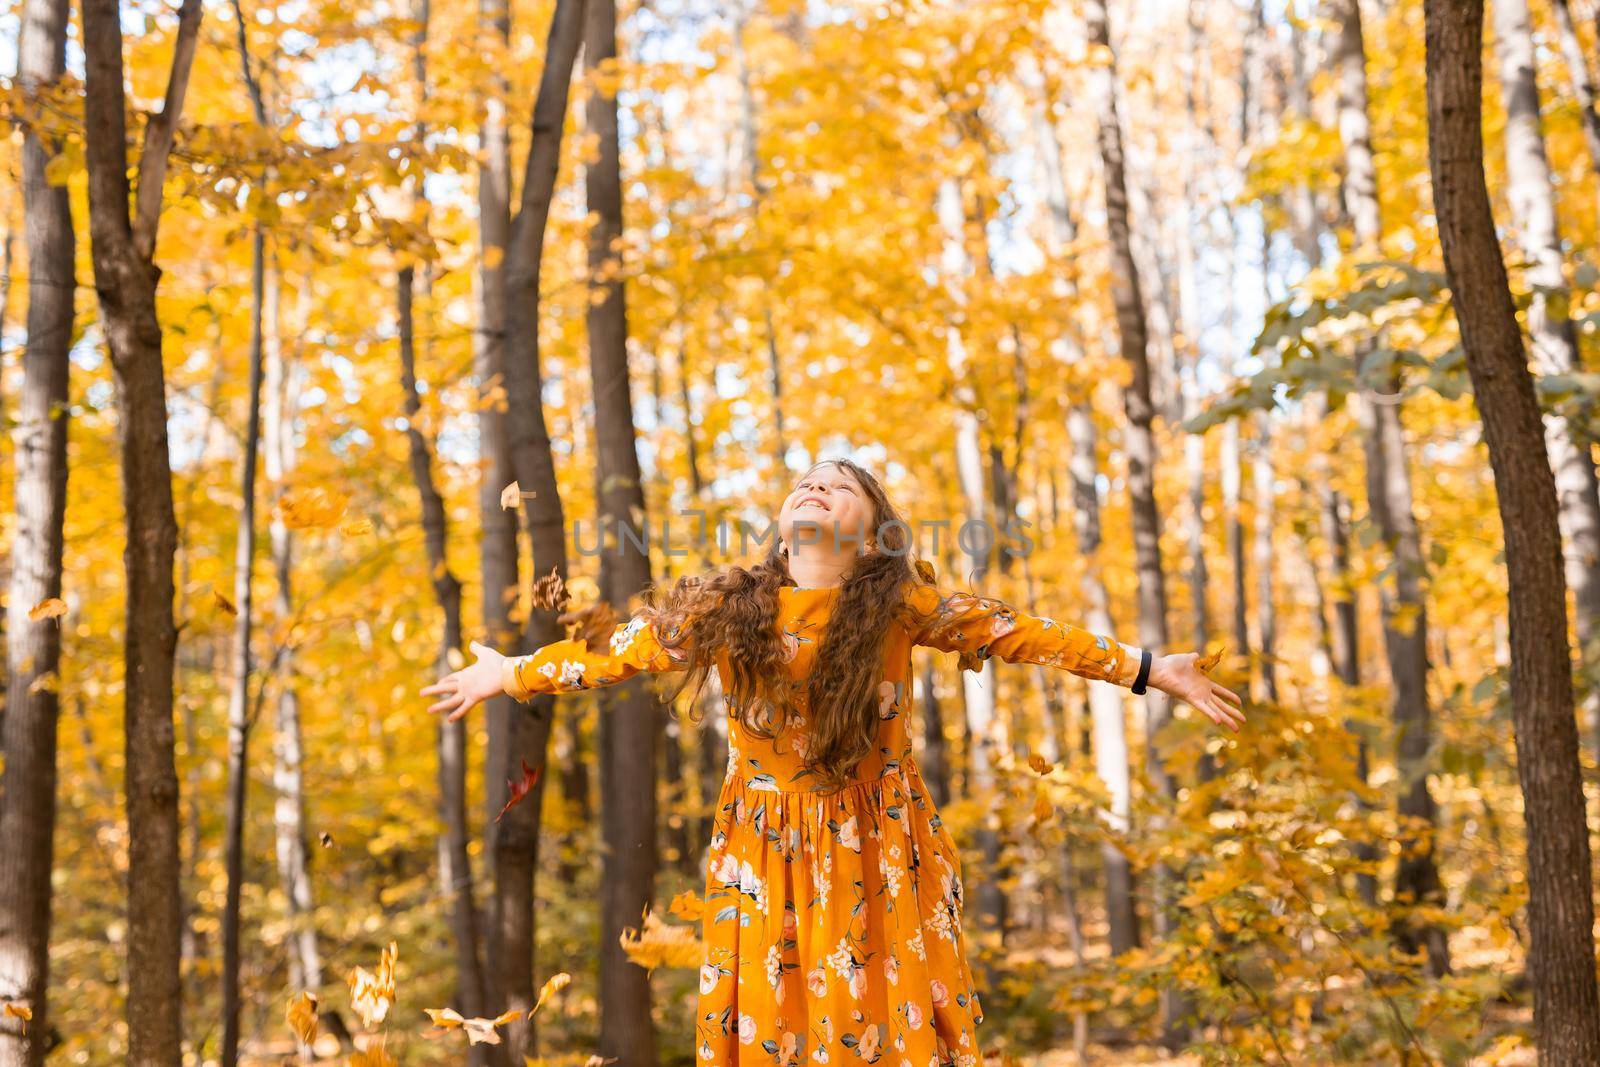 Child girl throwing fall leaves on autumn nature - fun, leisure and childhood